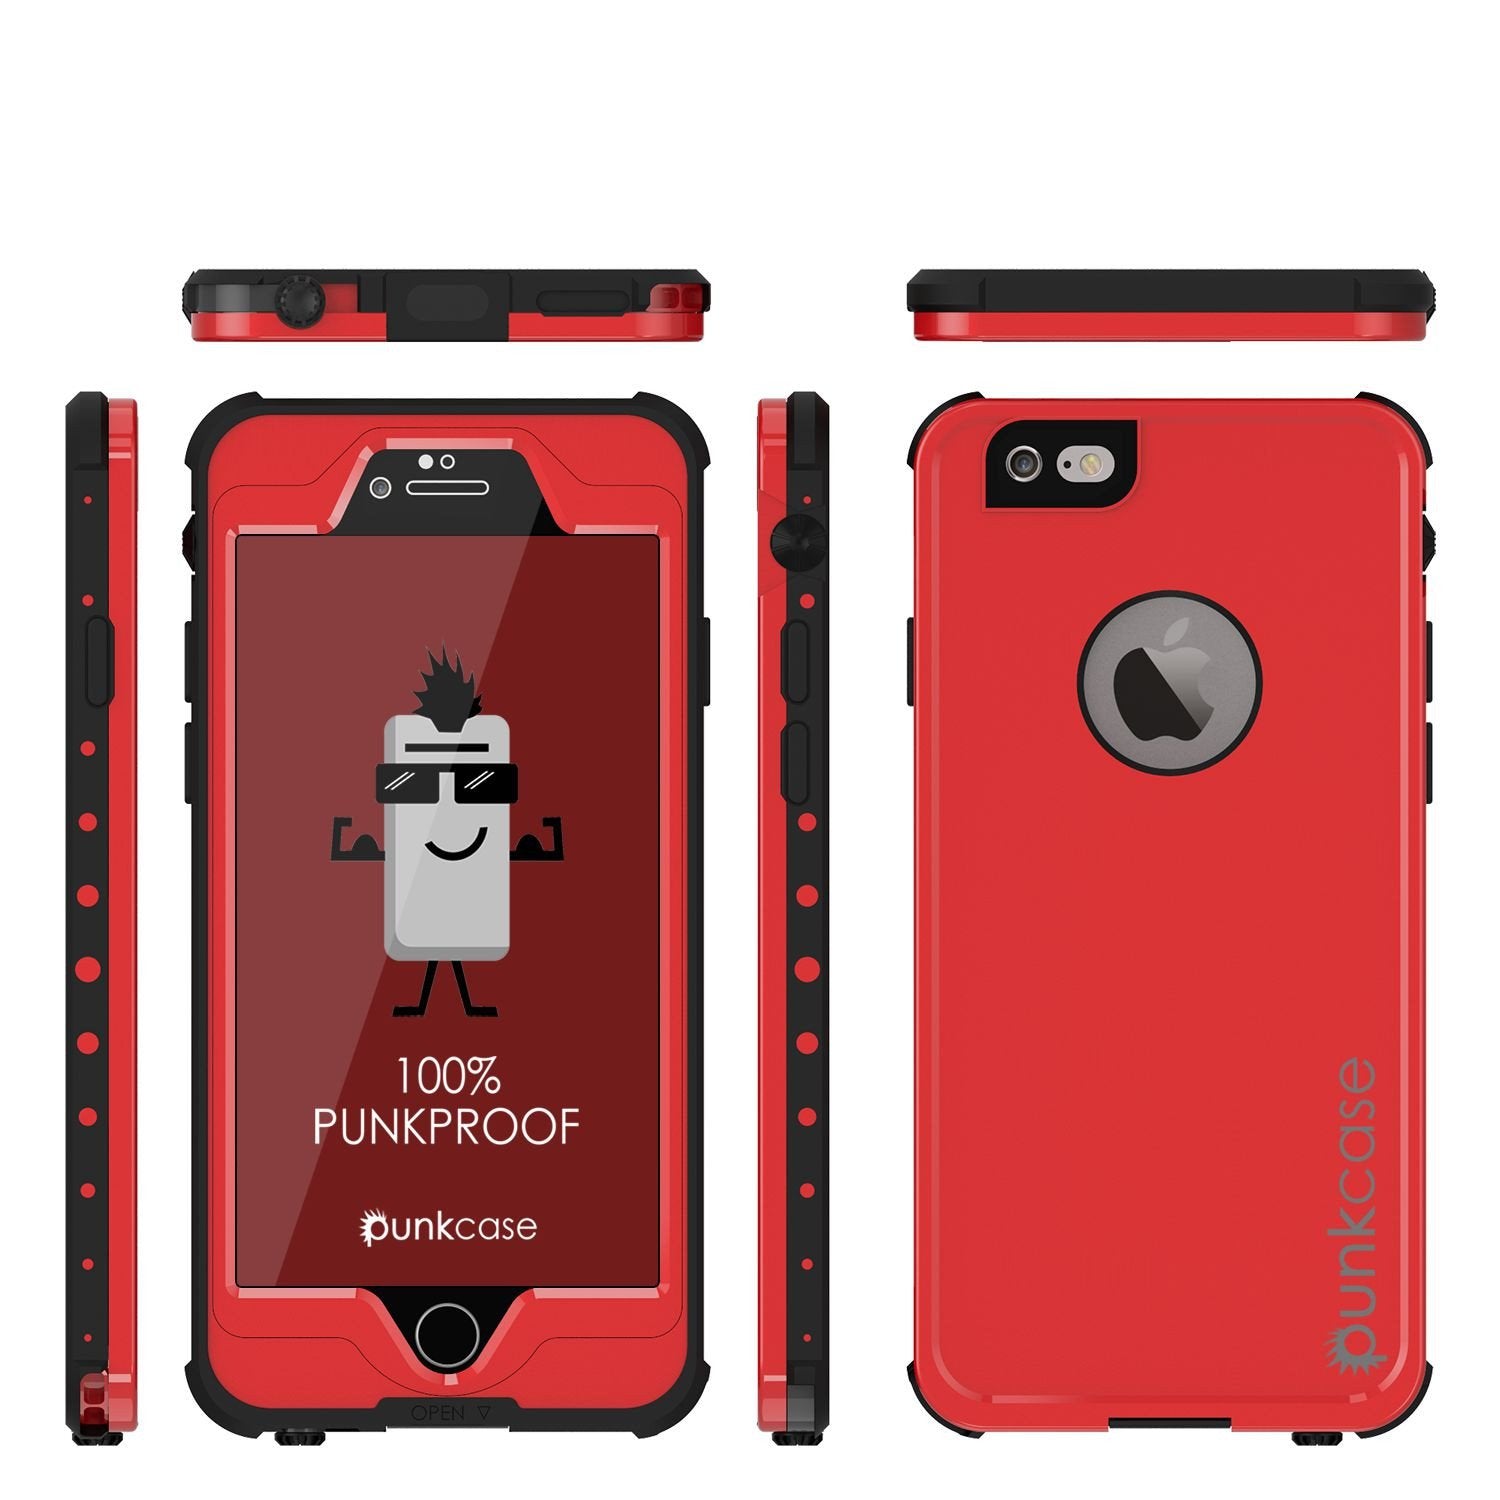 iPhone 6S+/6+ Plus Waterproof Case, PUNKcase StudStar Red w/ Attached Screen Protector | Warranty